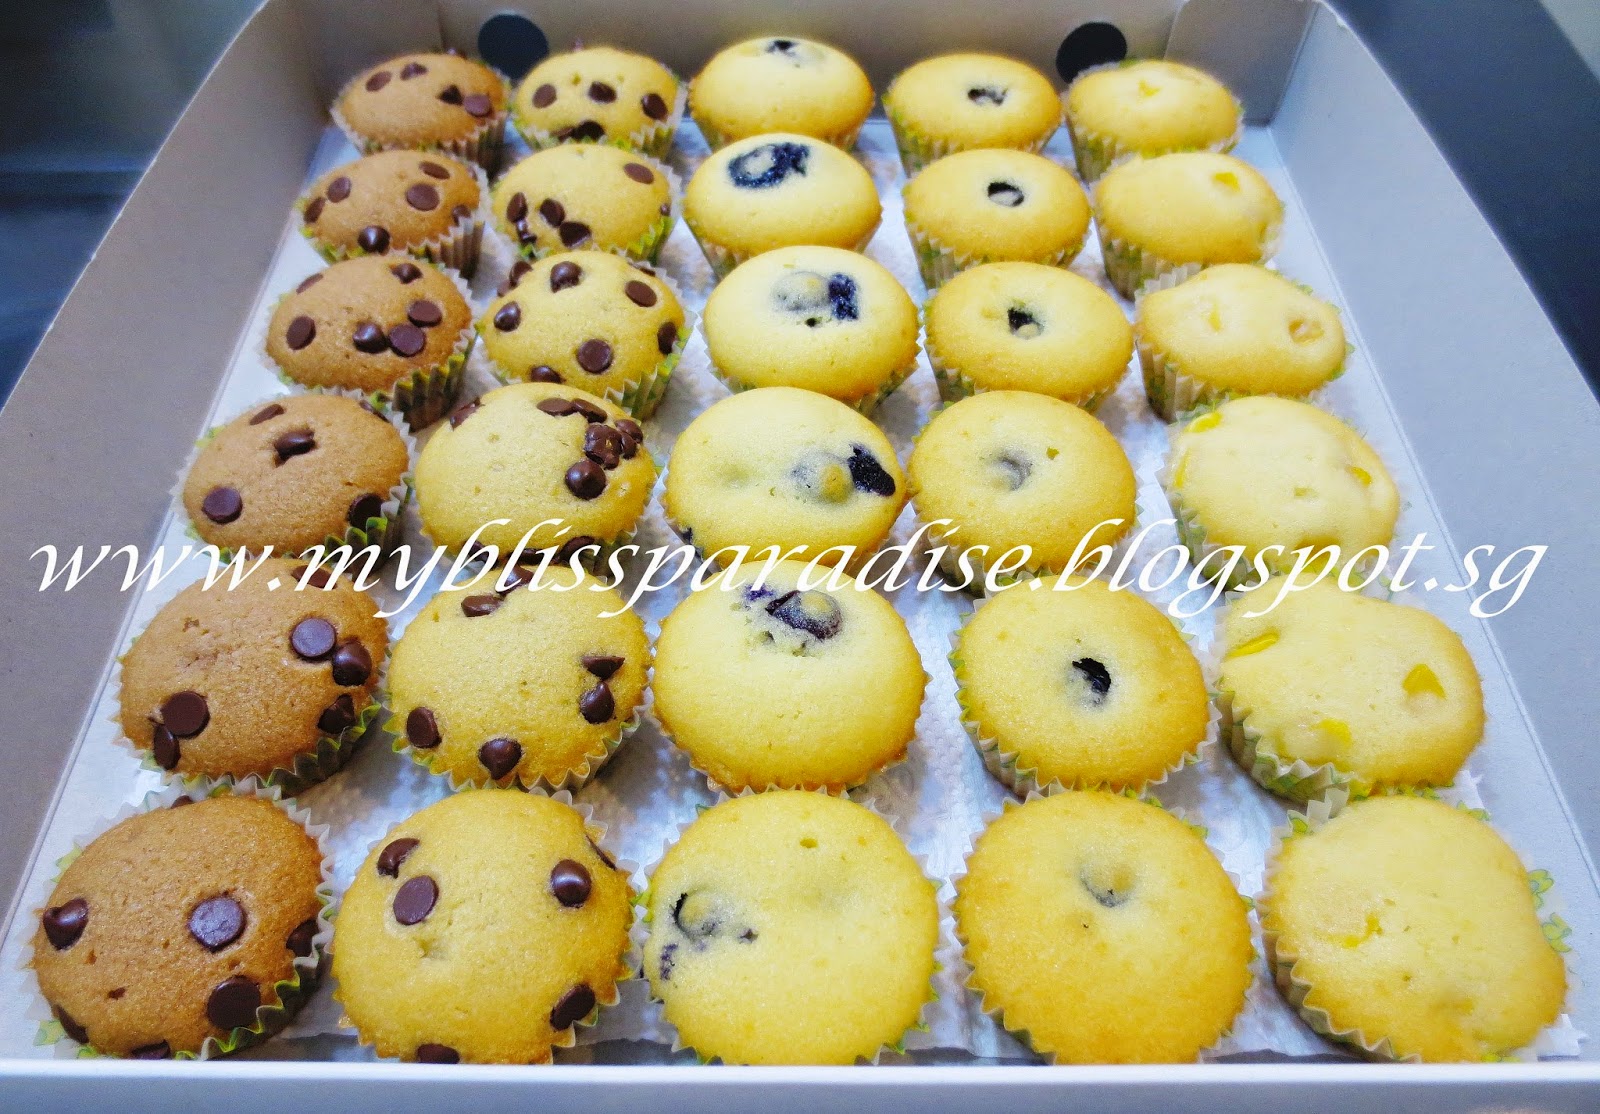 http://myblissparadise.blogspot.sg/2014/06/different-flavors-of-mini-muffins-20.html